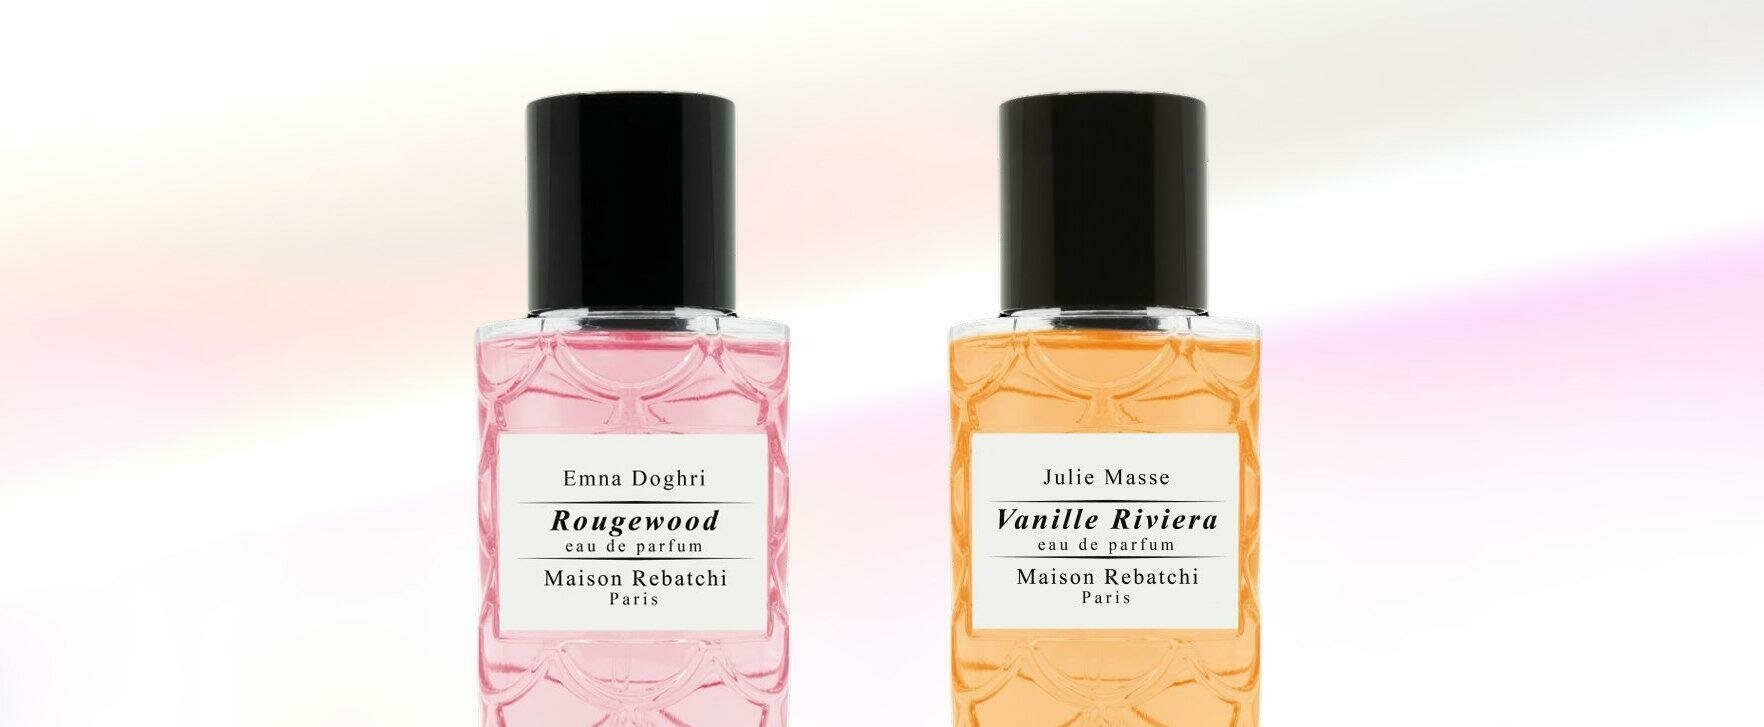 Maison Rebatchi Unveils New Fragrance Duo With “Rougewood” and “Vanille Riviera”